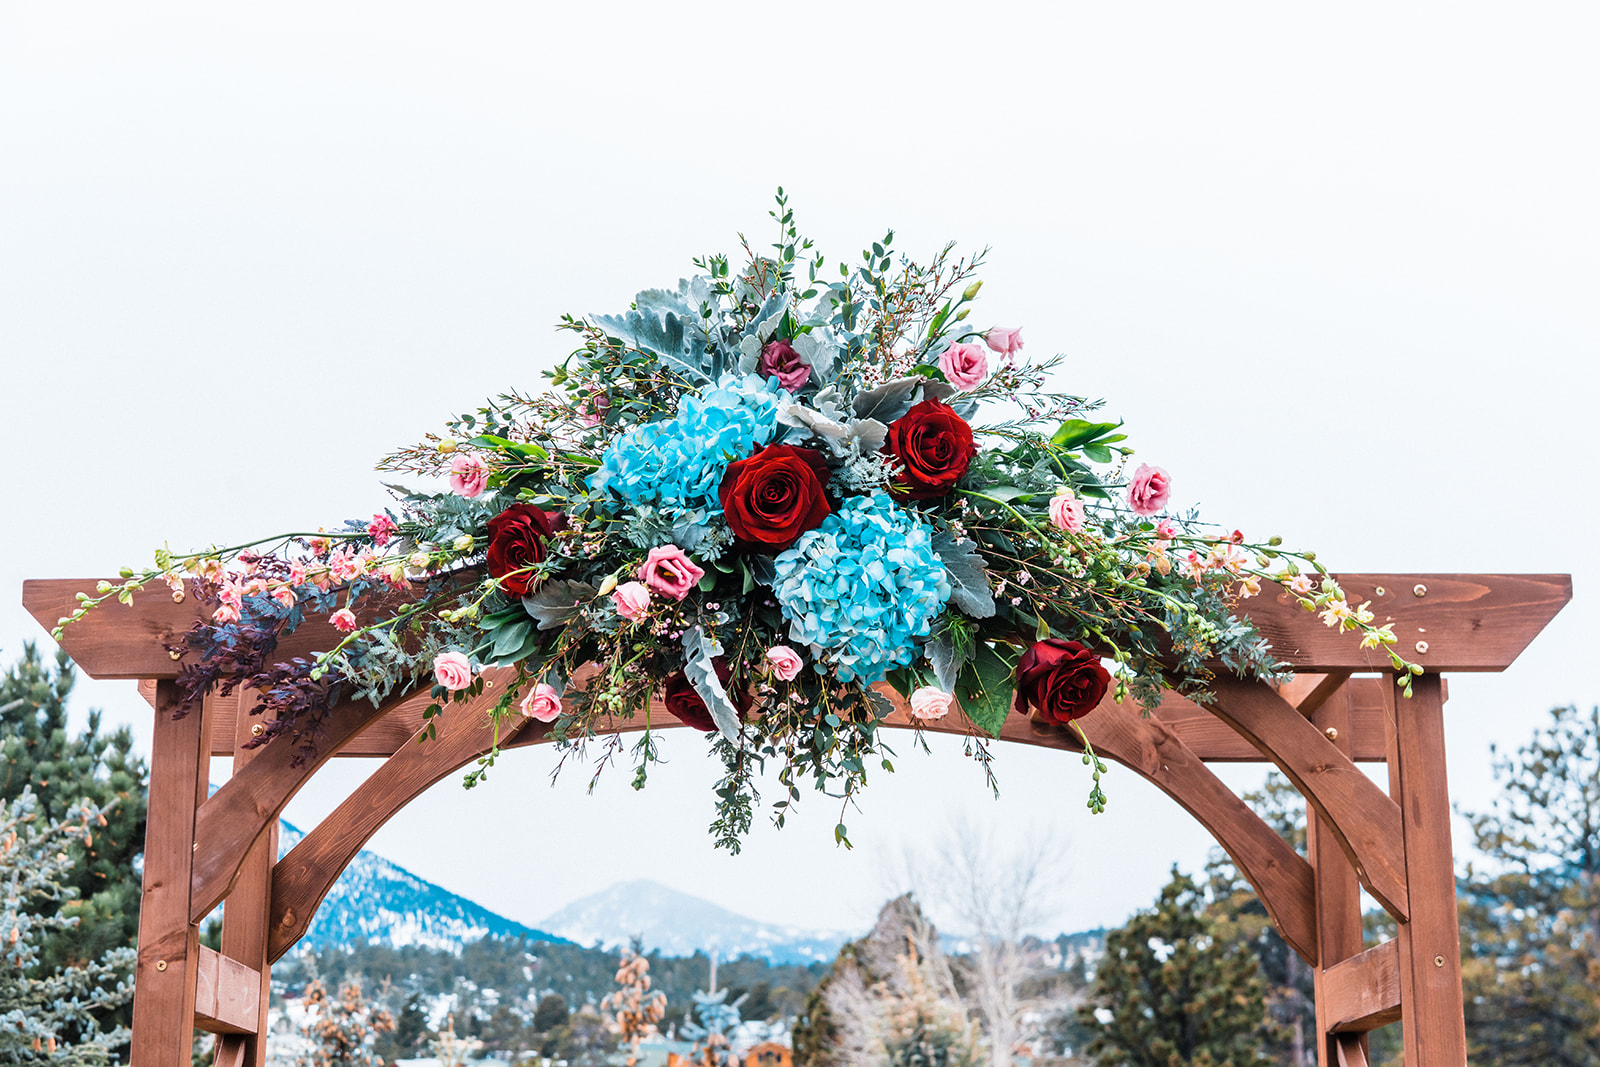 Bright blue, red, and green floral arrangement atop a wood square wedding arch with a snowy mountain landscape in the background.